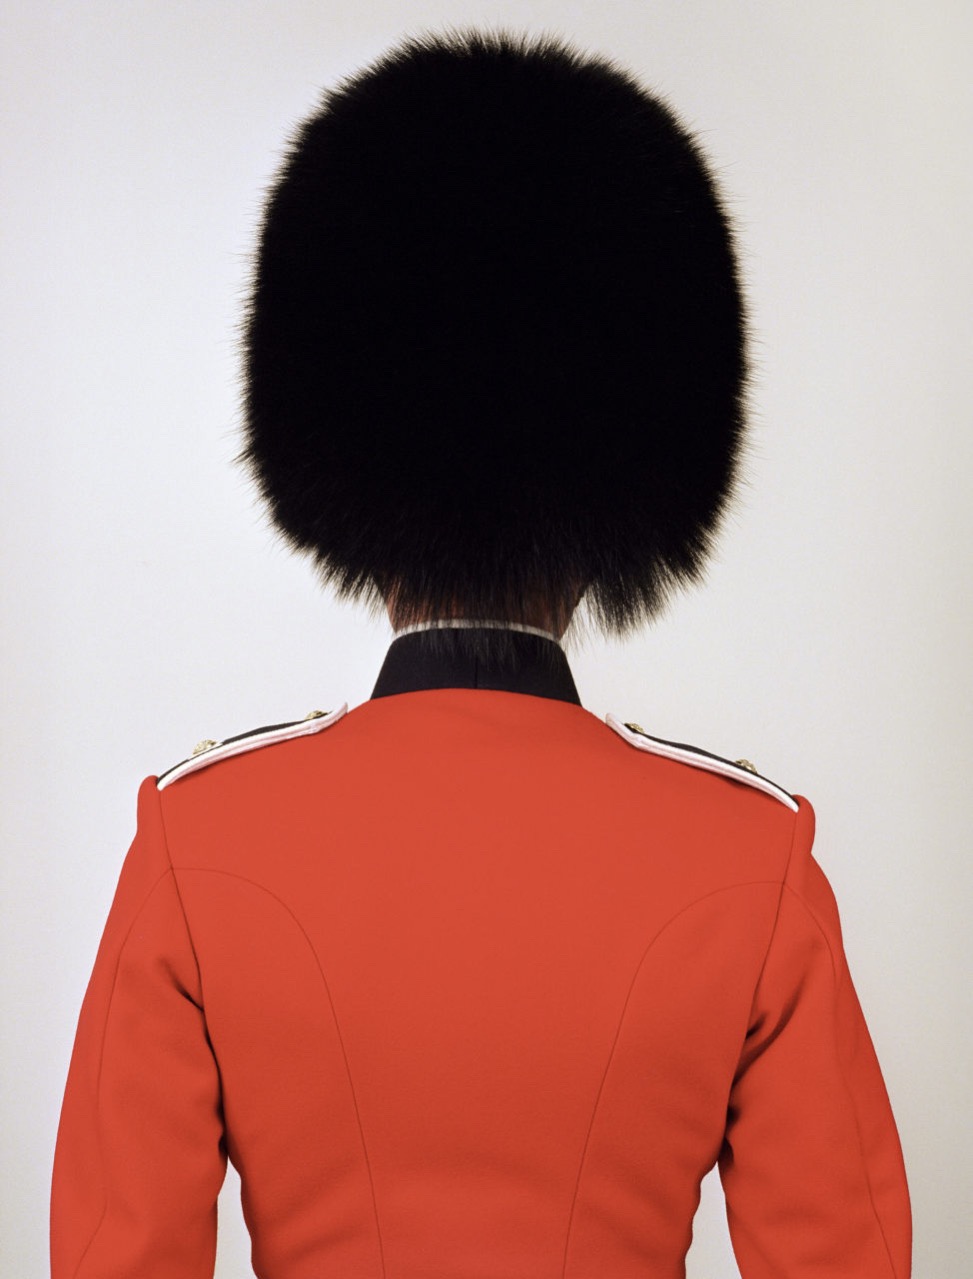 Scot guard, UK, from the EMPIRE series, 2004-2007 – Photo by Charles Fréger